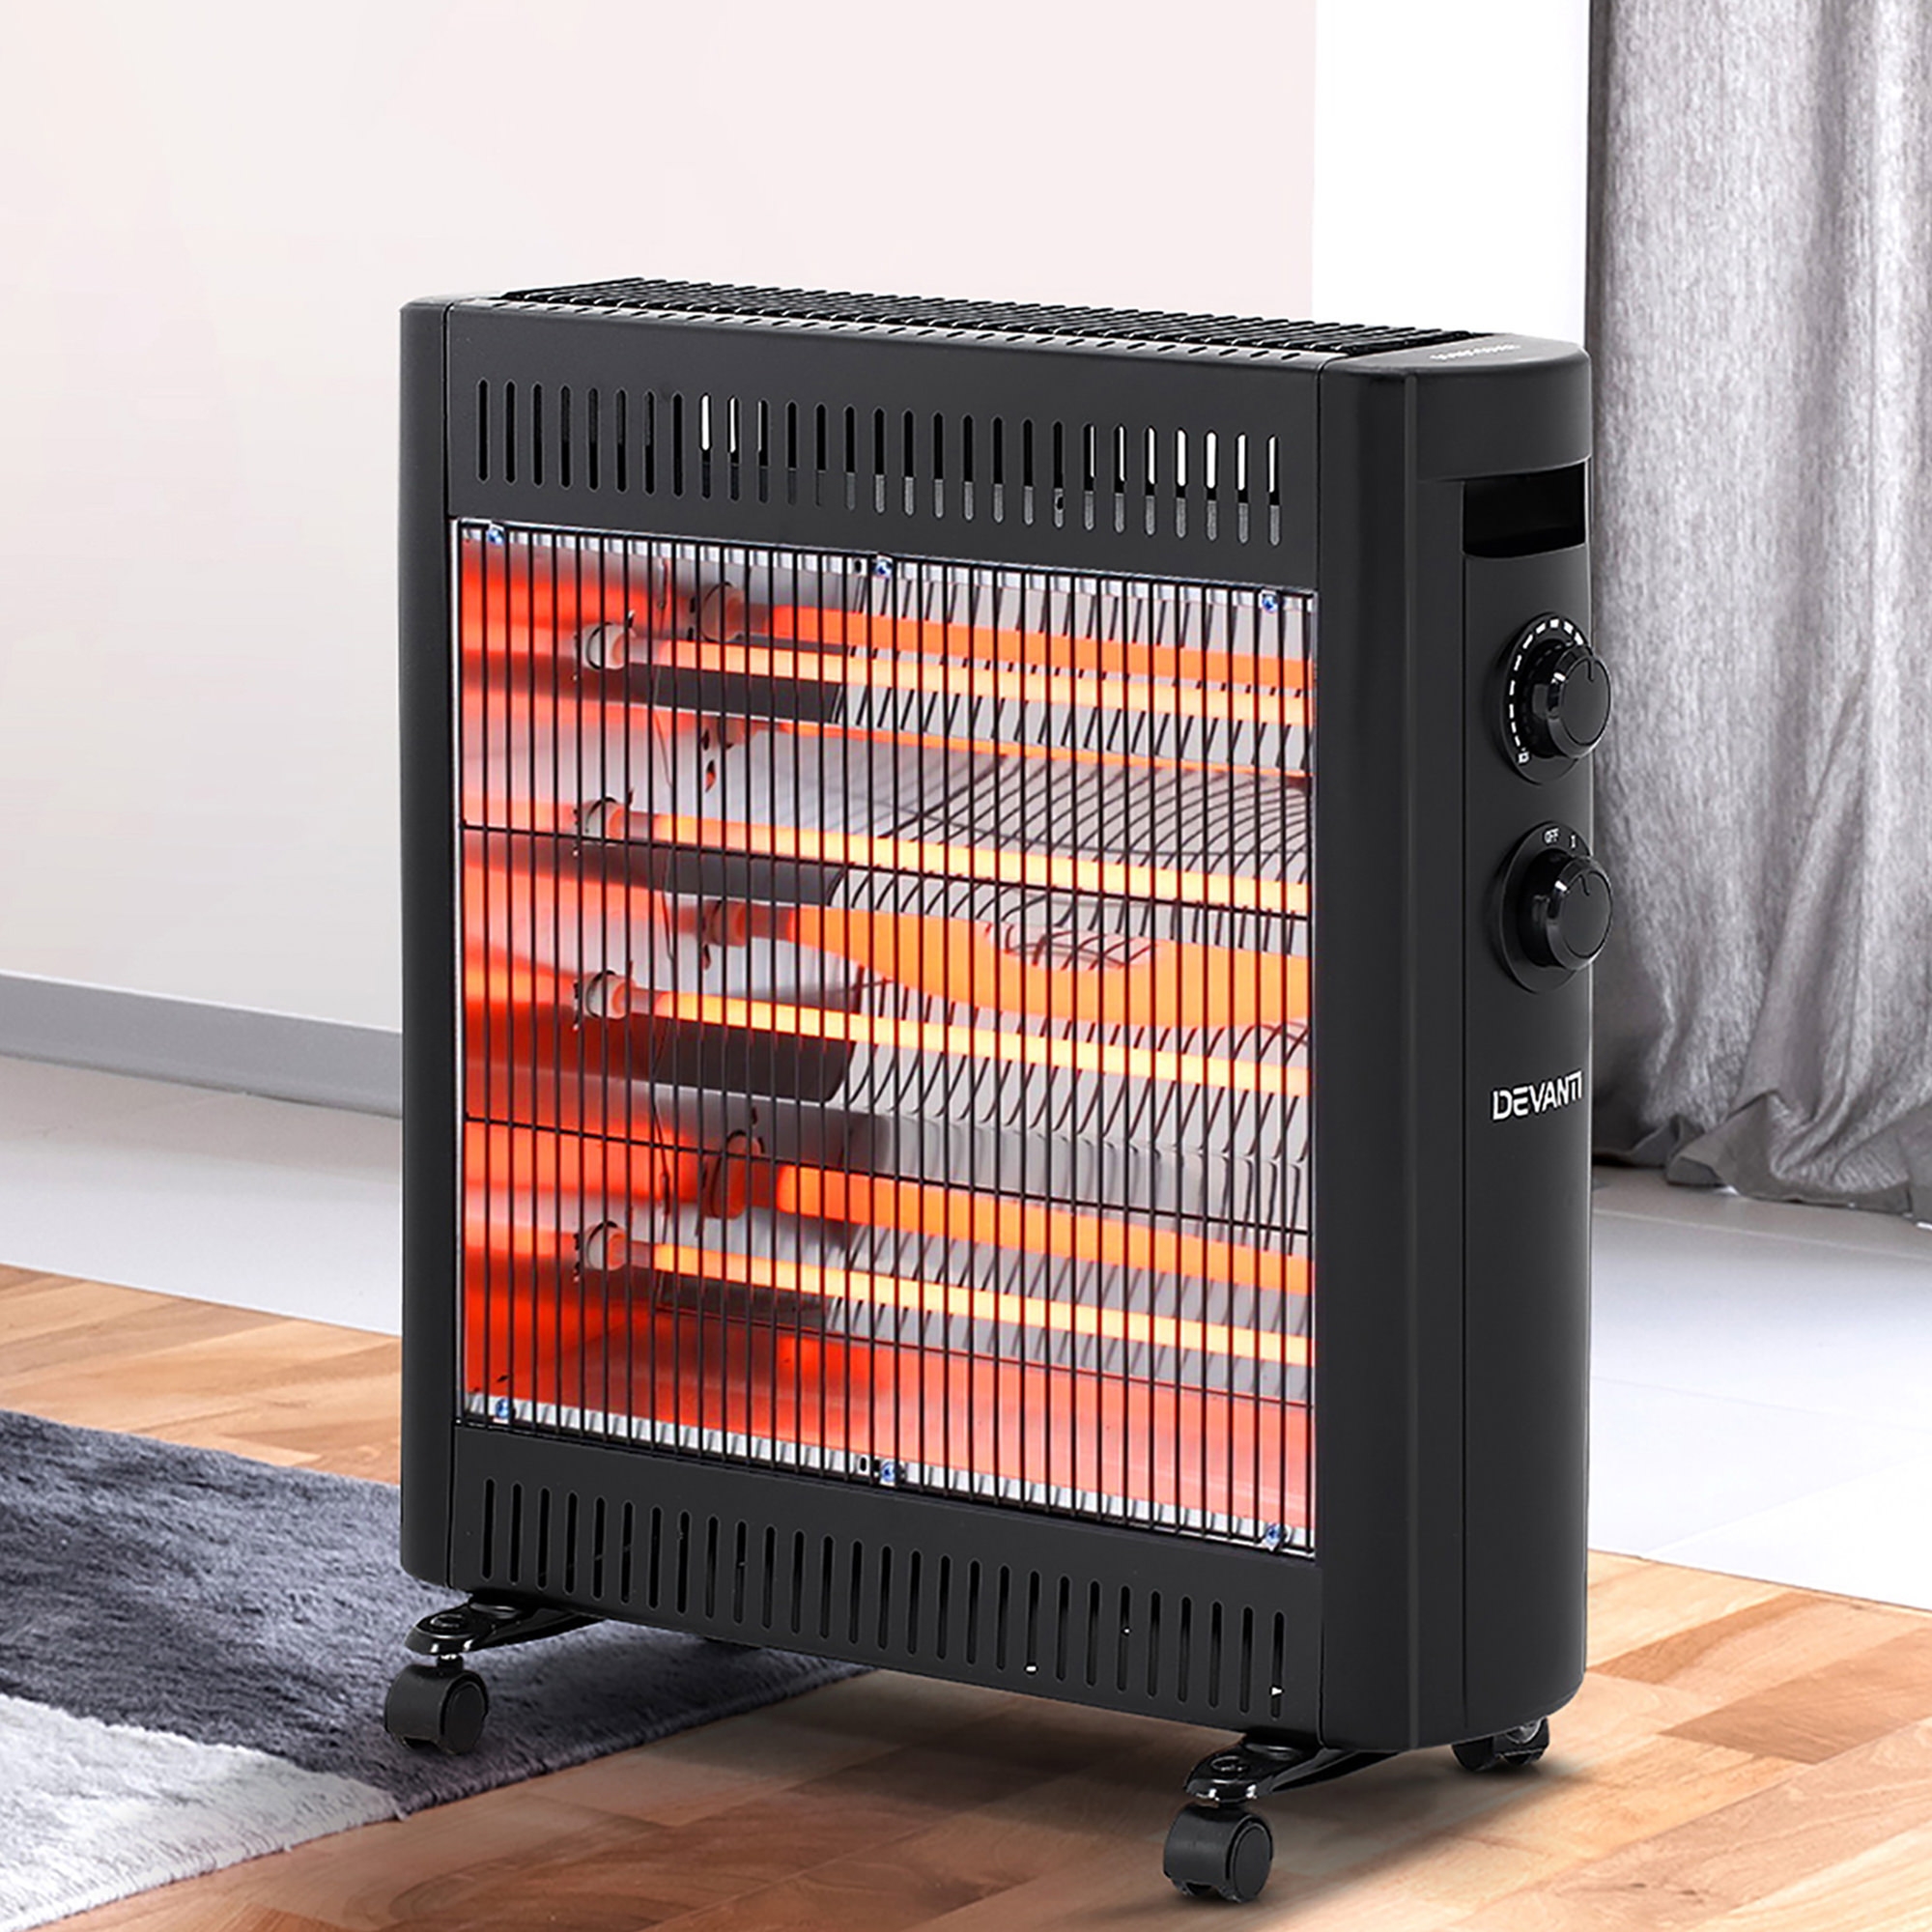 Devanti Infrared Radiant Portable Space Heater 2200W Image 2